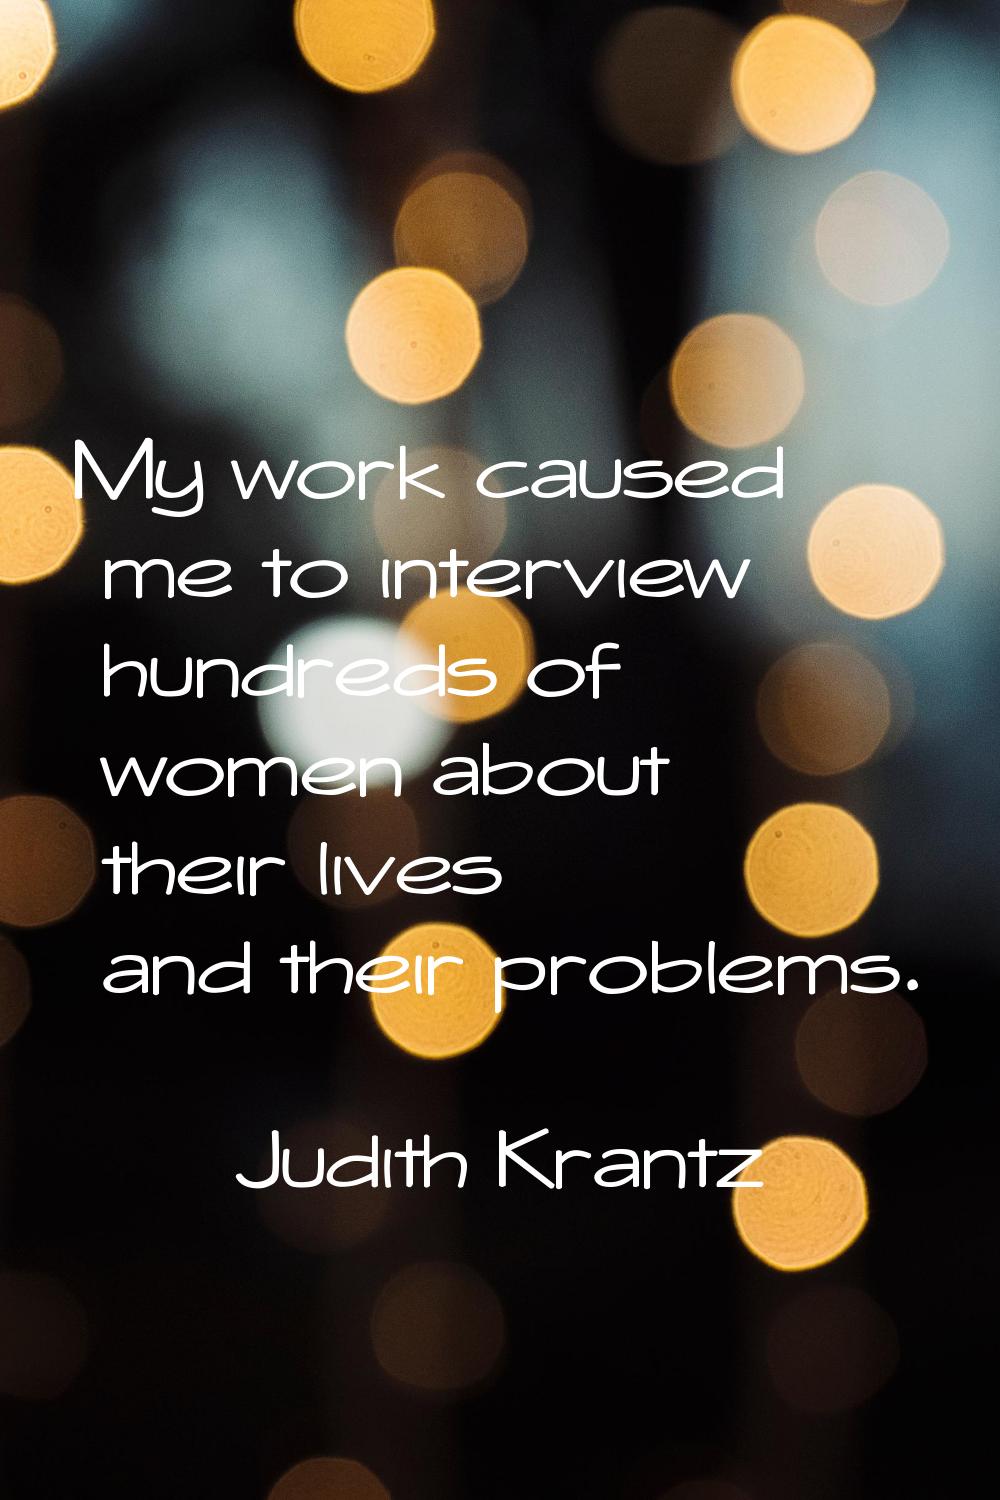 My work caused me to interview hundreds of women about their lives and their problems.